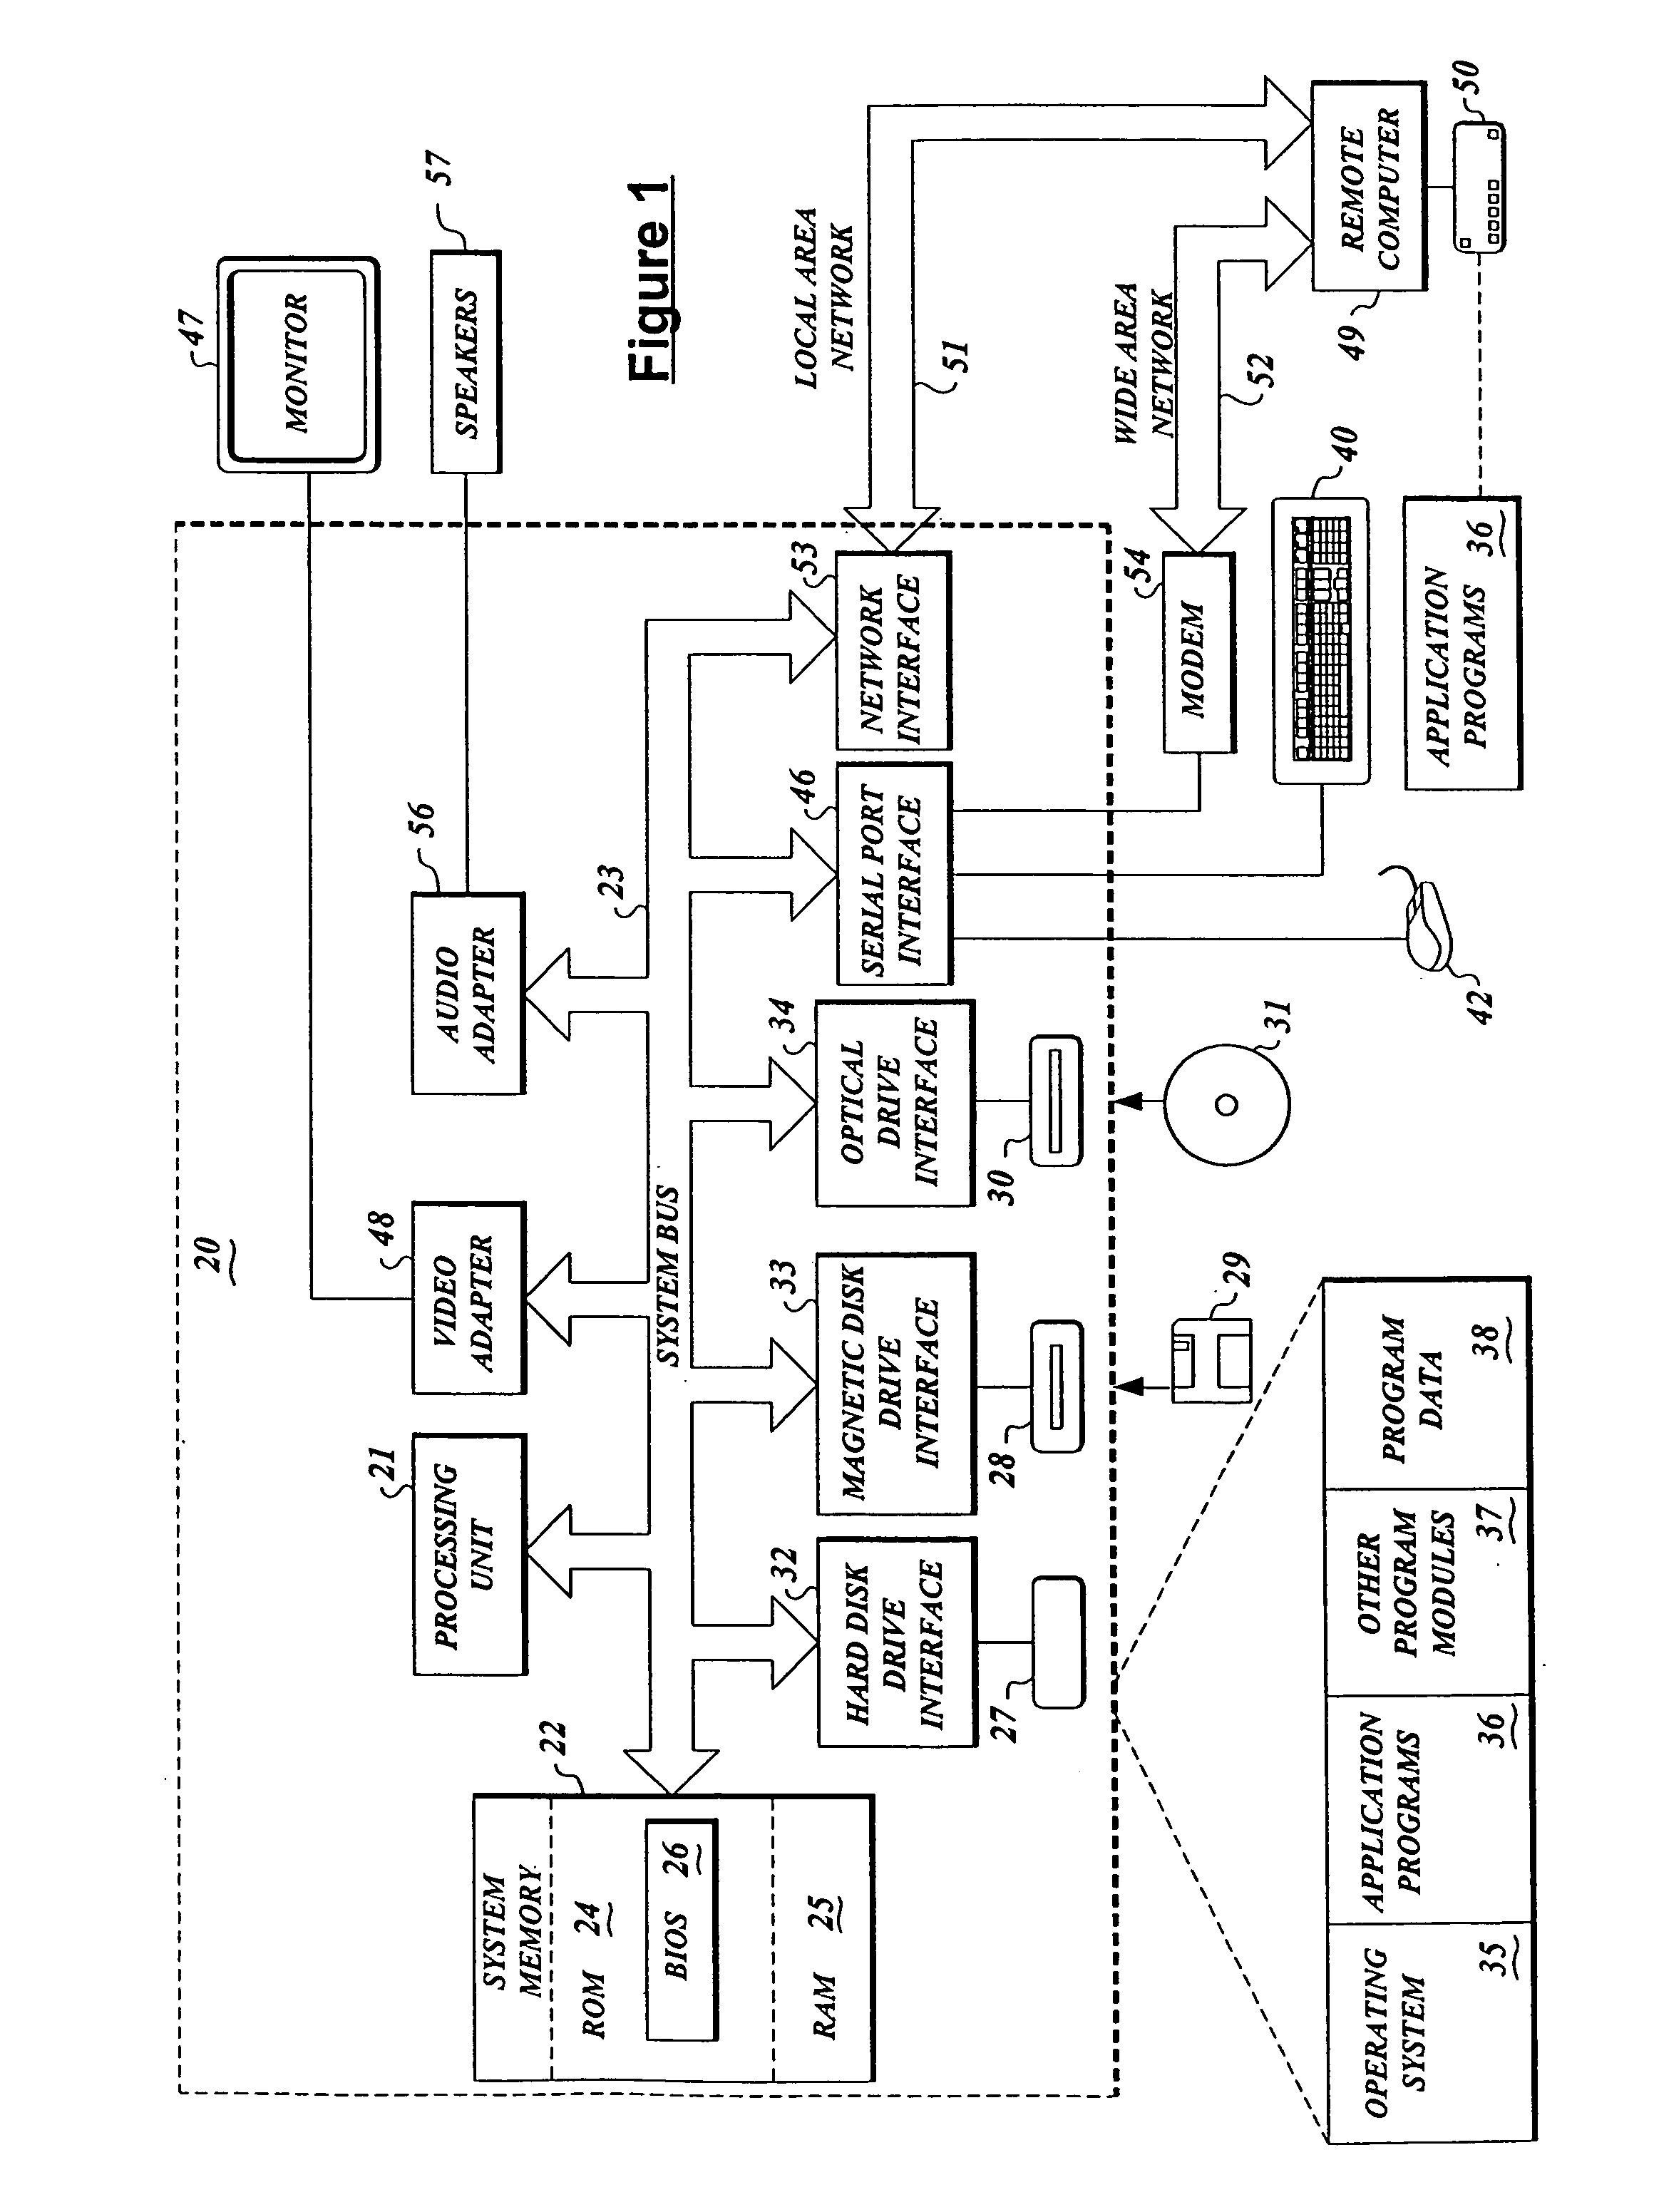 Methods and apparatus for displaying multiple contexts in electronic documents